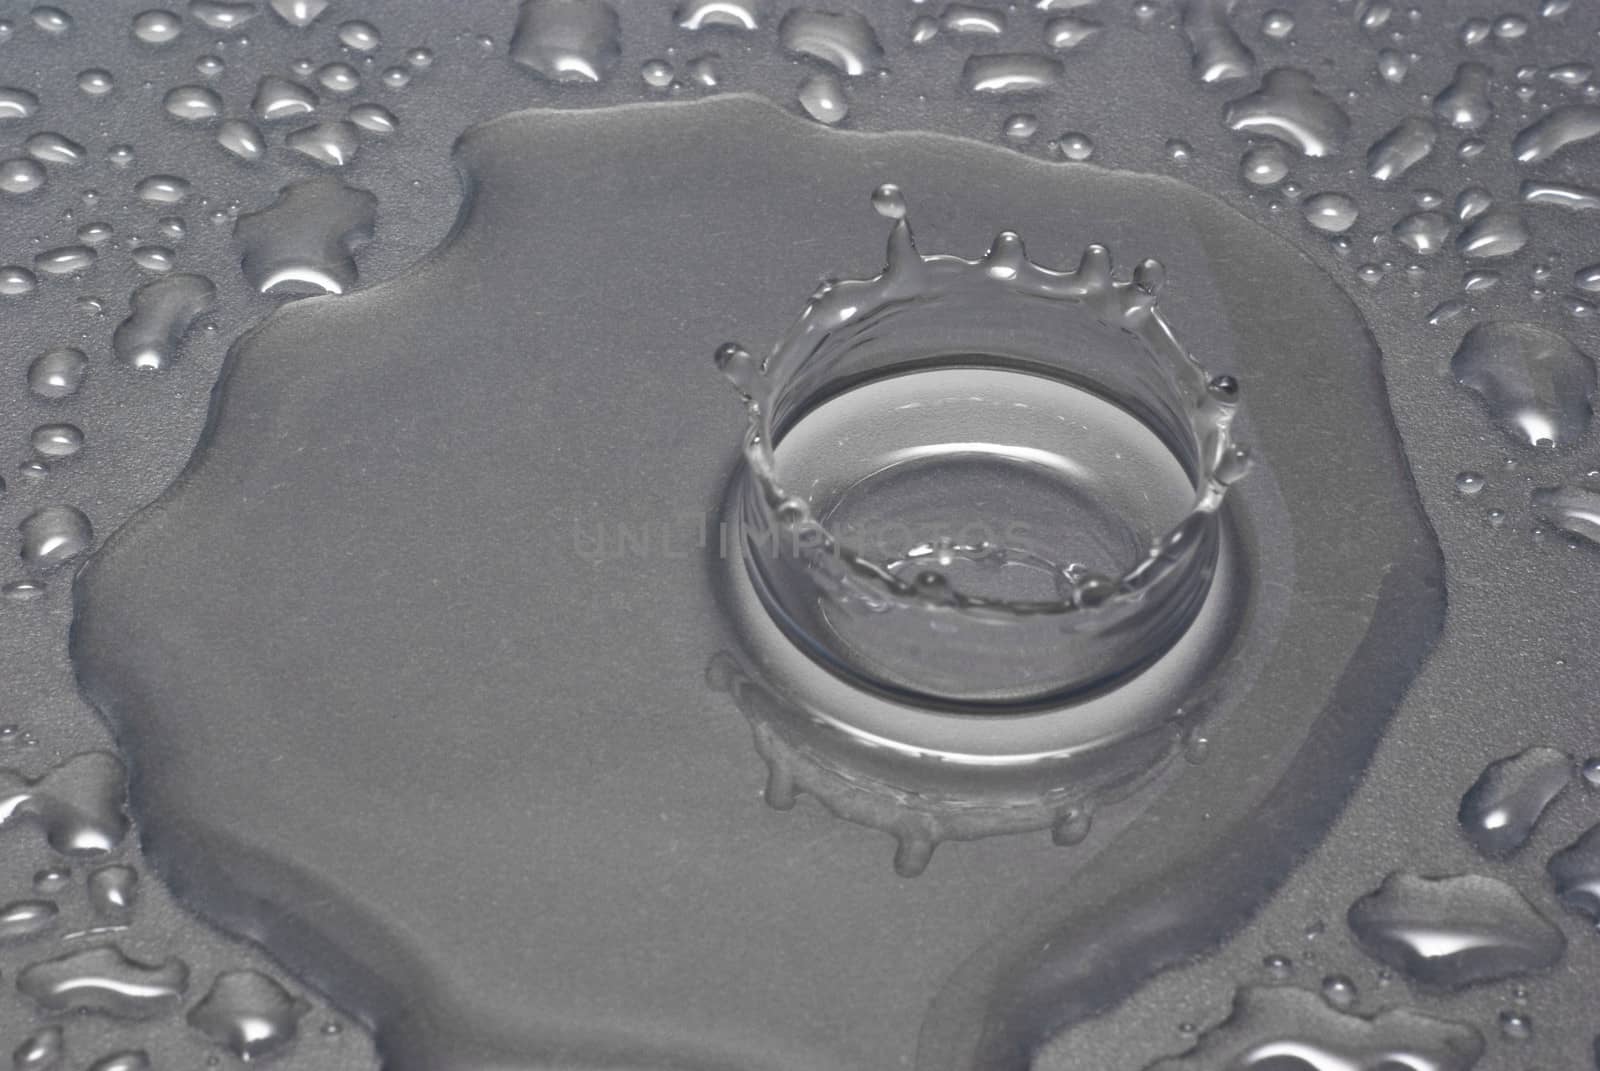 A water drop forms a crown as it splashes into a pool of water